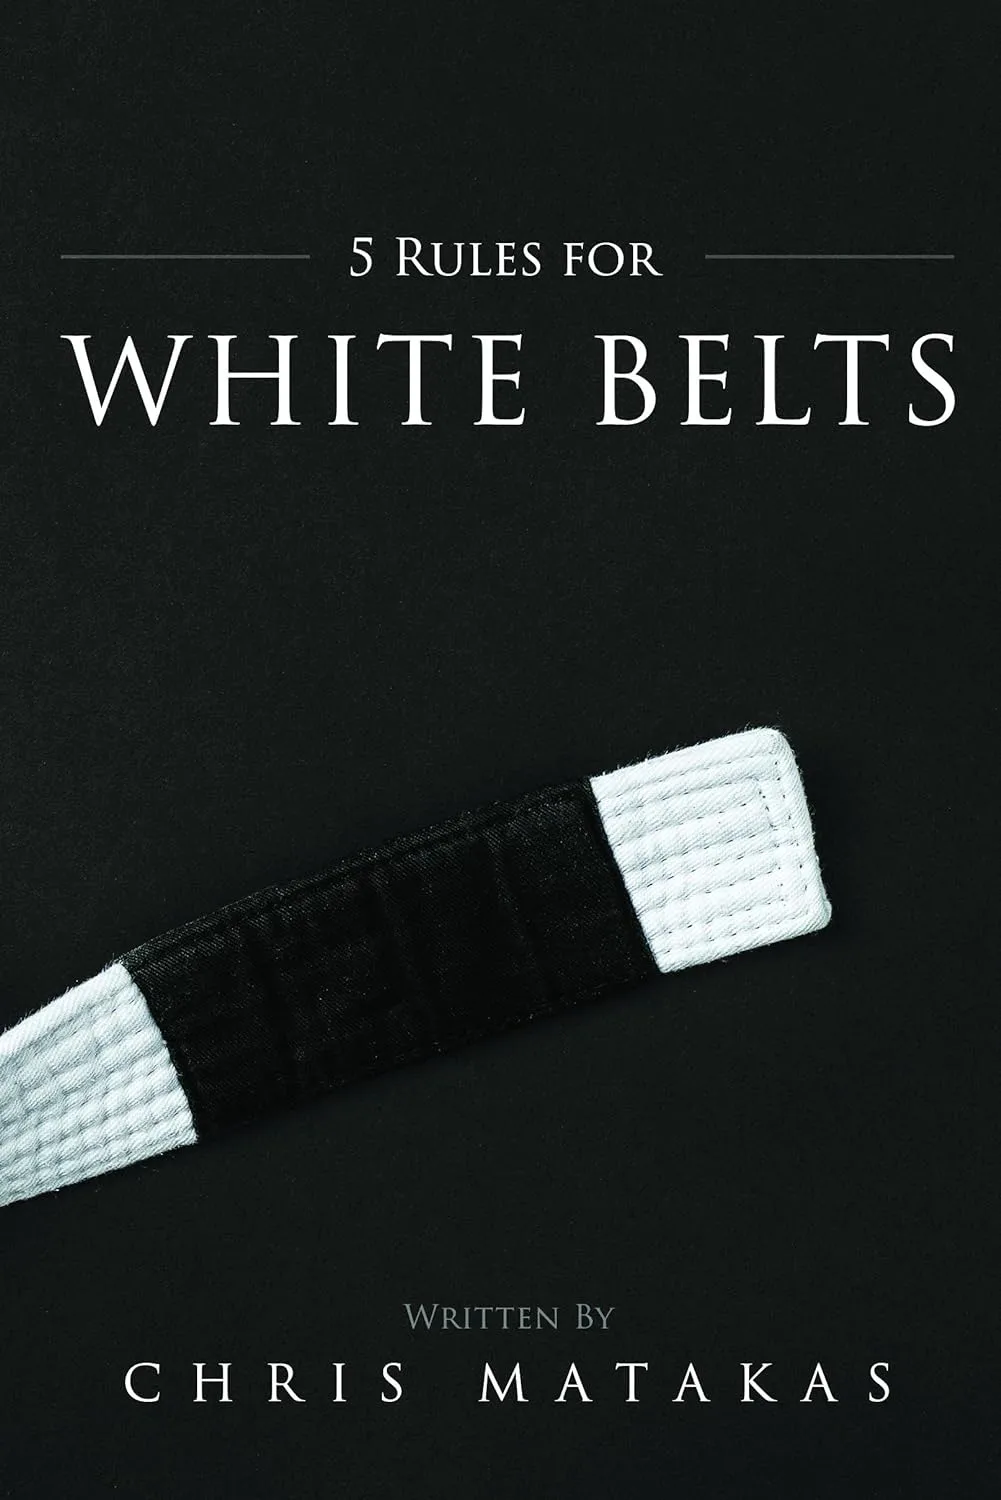 5 Rules for White Belts
